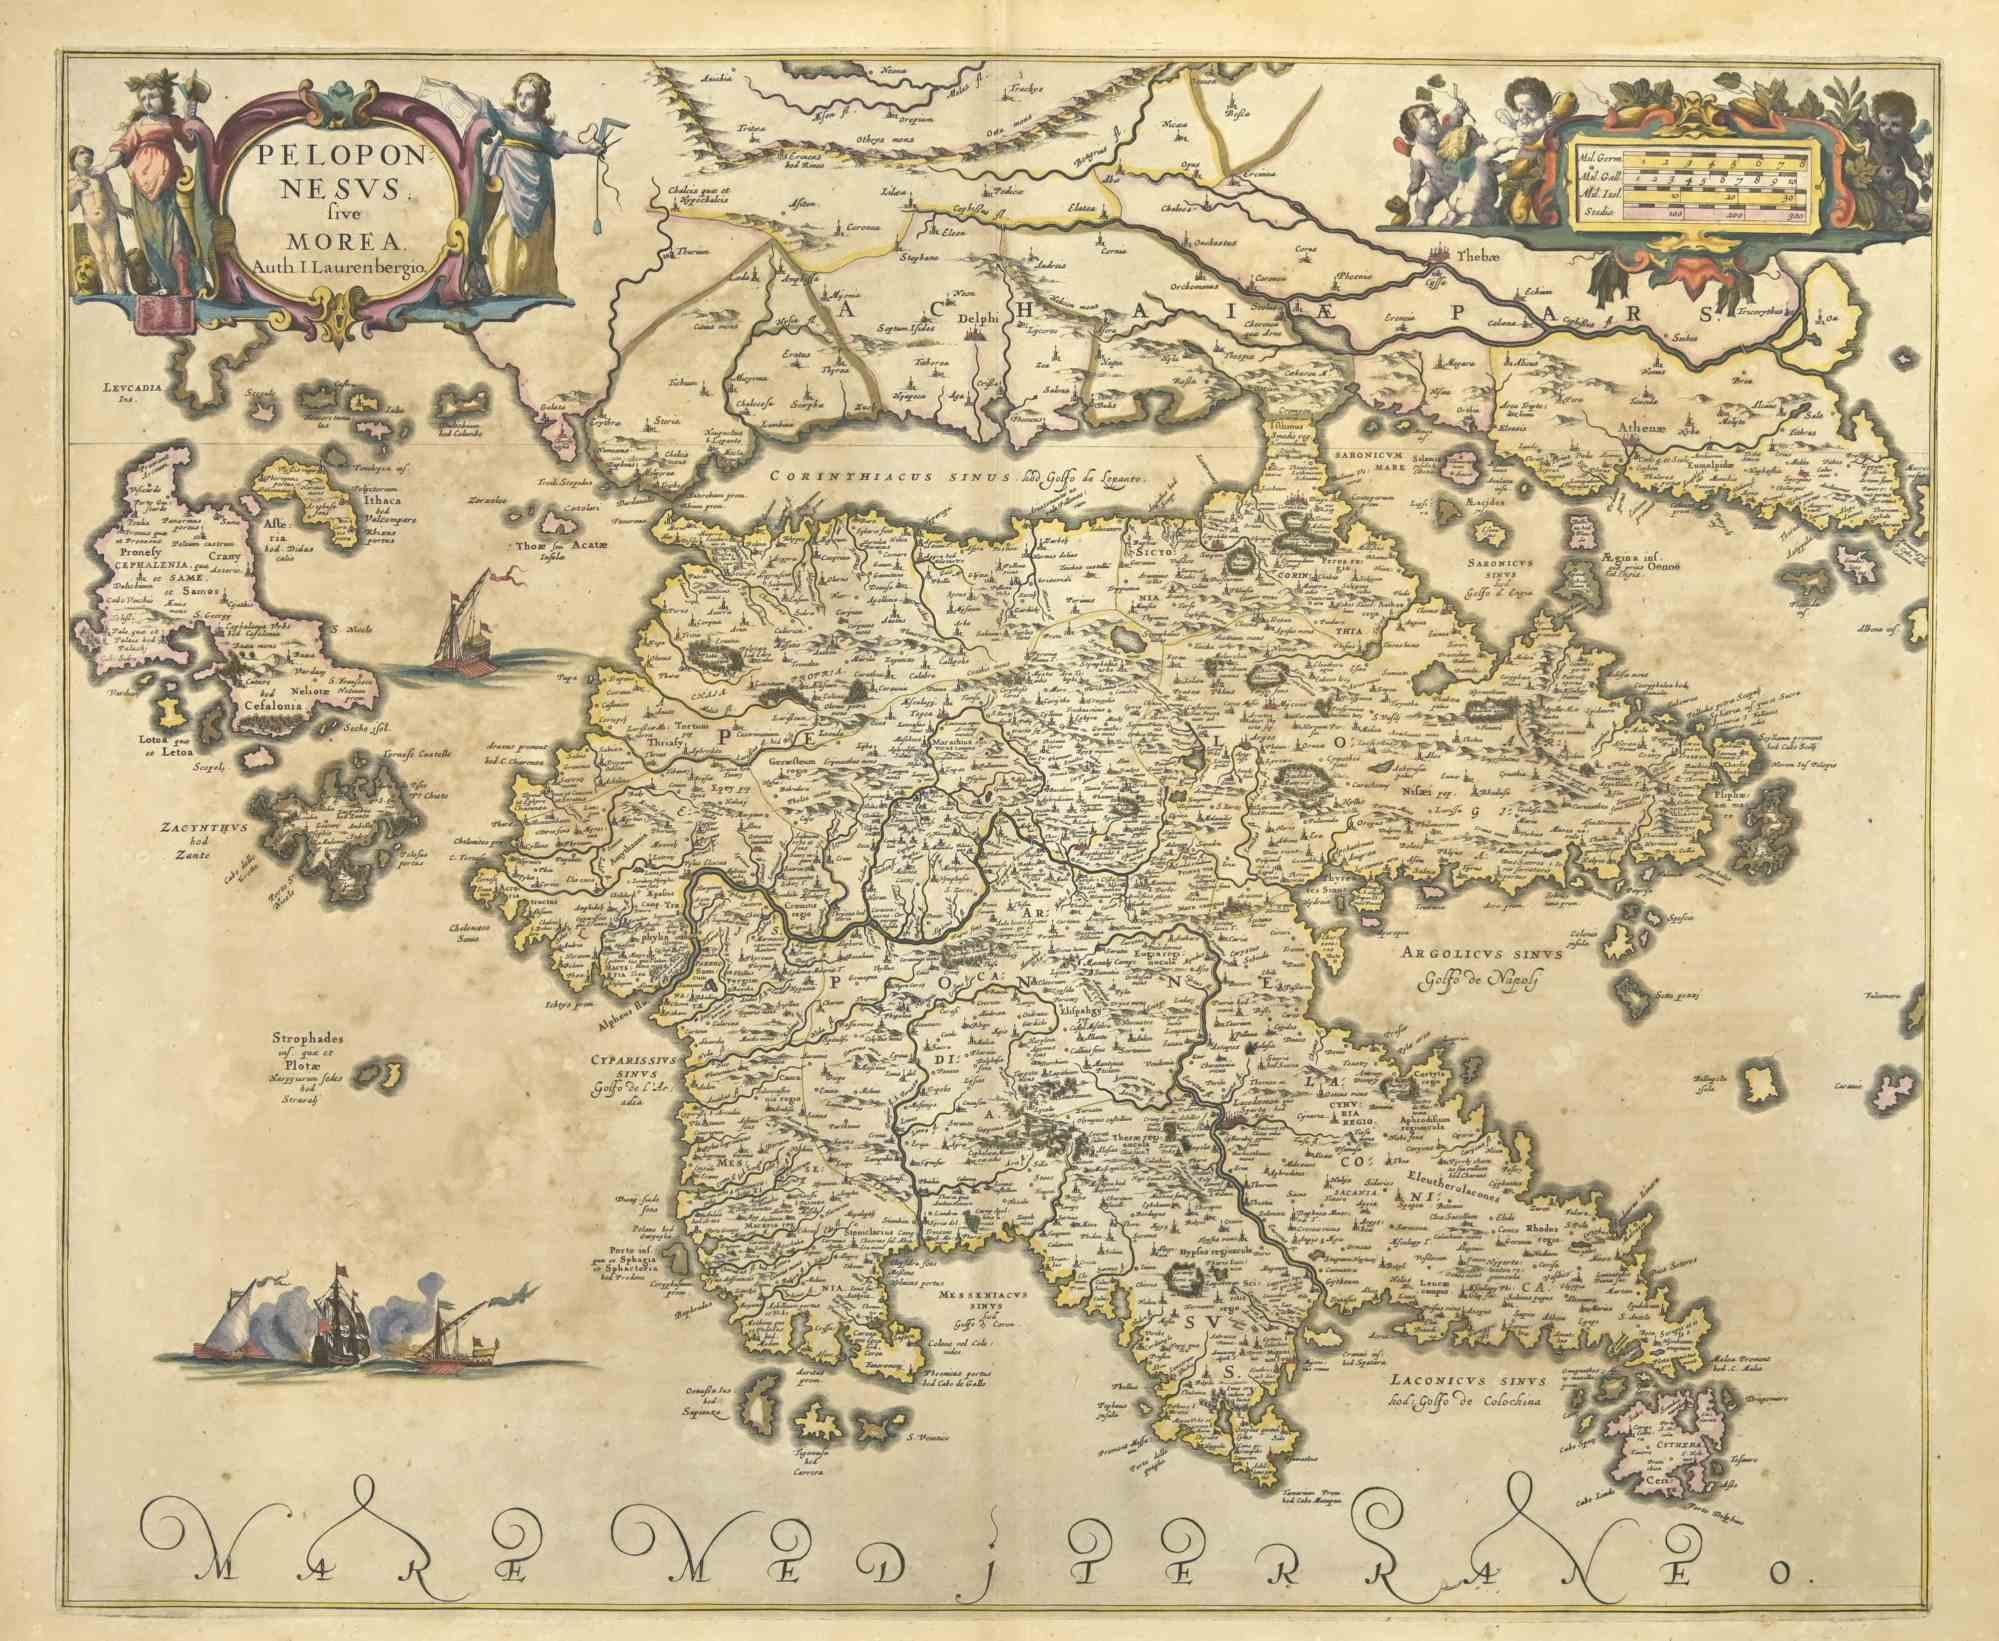 Peloponnesvs is an antique map realized in 1650 by Johannes Janssonius (1588-1664).

The Map is Hand-colored etching, with coeval watercoloring.

Good conditions with slight foxing.

From Atlantis majoris quinta pars, Orbem maritimum [Novus Atlas,